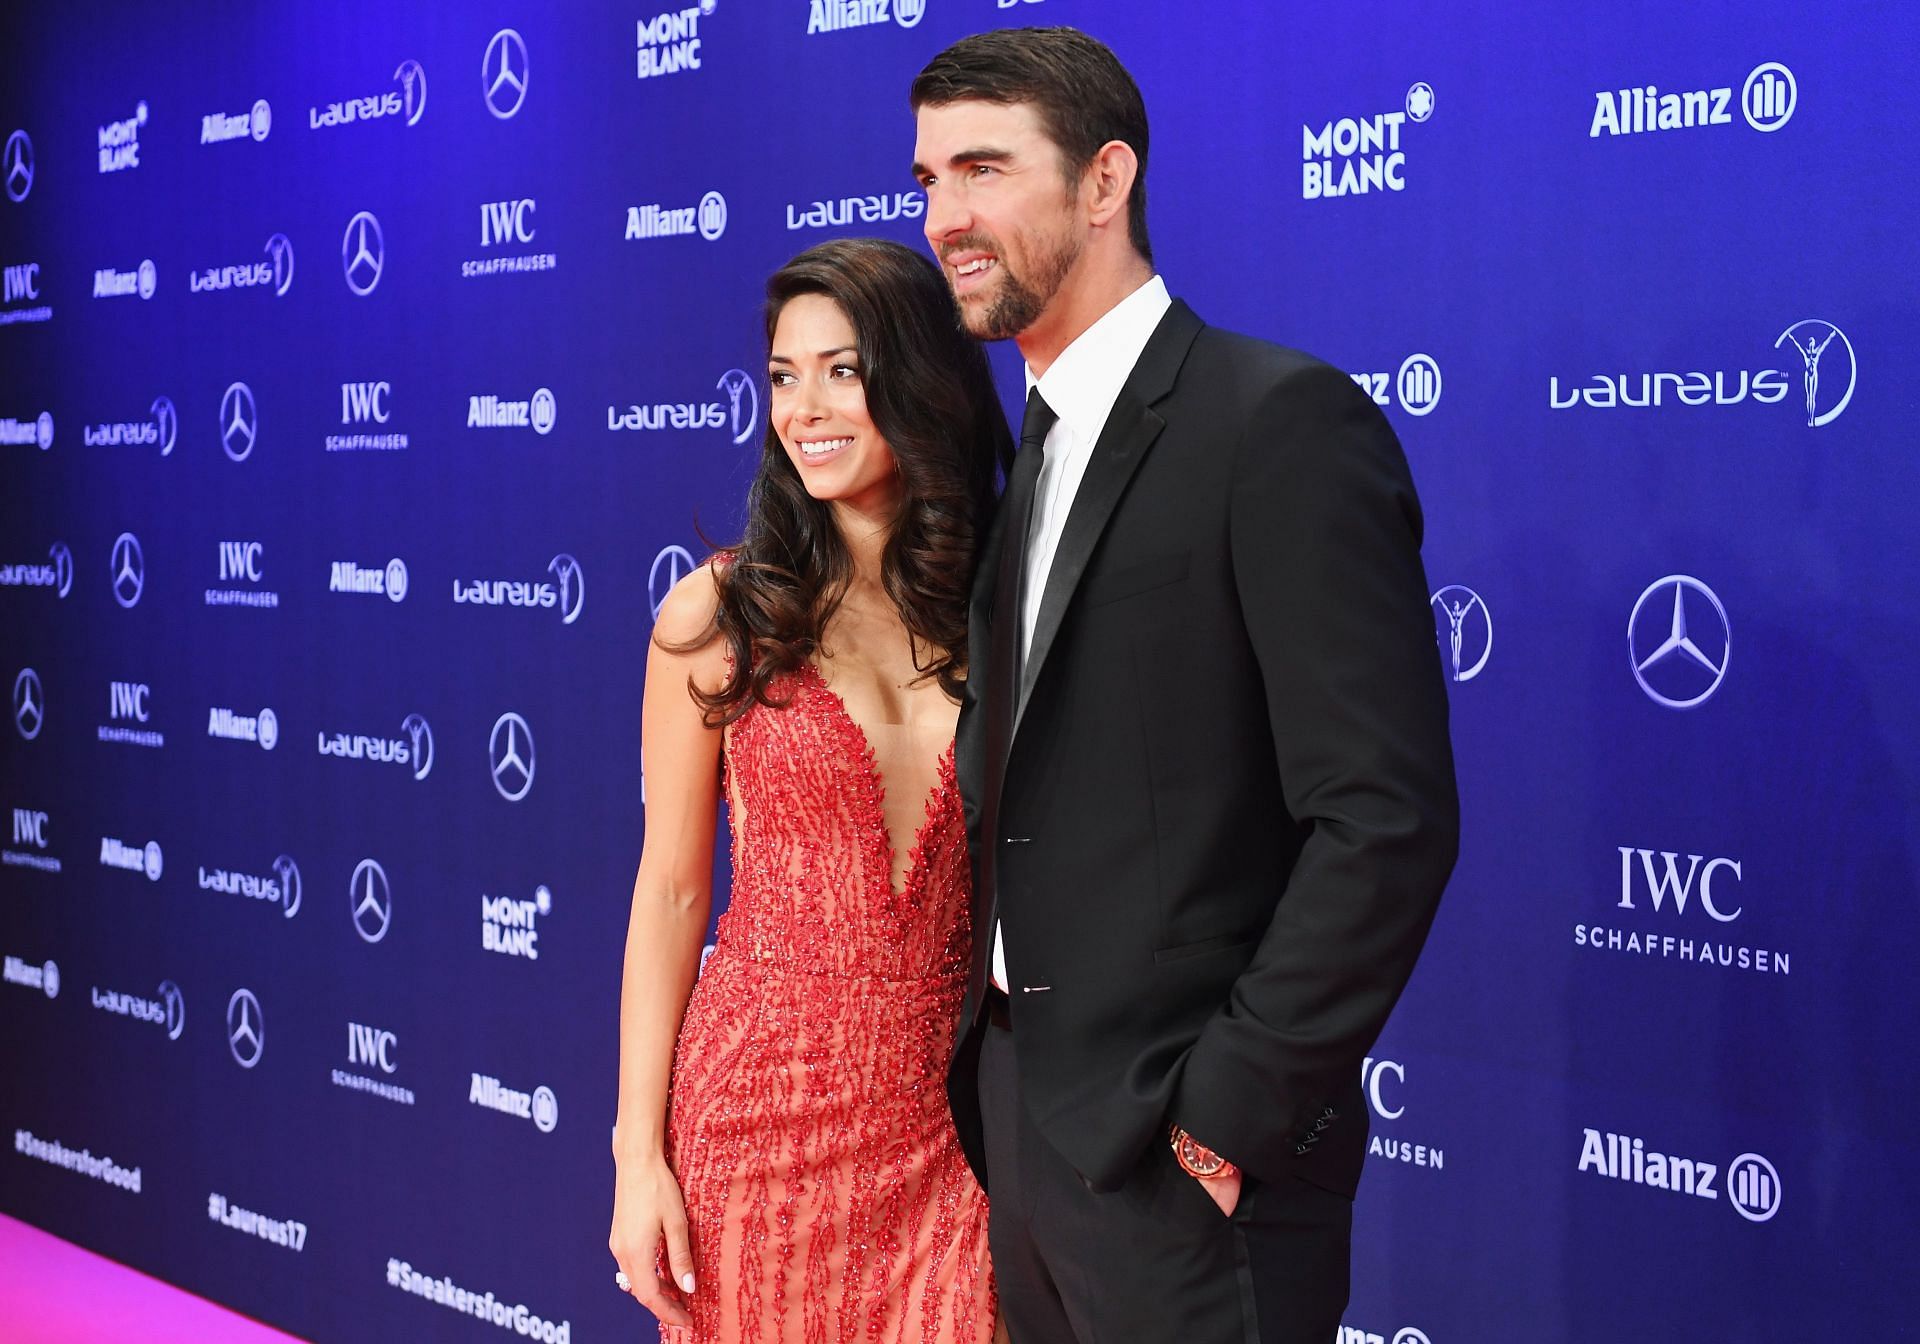 Michael Phelps and Nicole Phelps attended the 2017 Laureus World Sports Awards. (Photo by Stuart C. Wilson/Getty Images for Laureus)